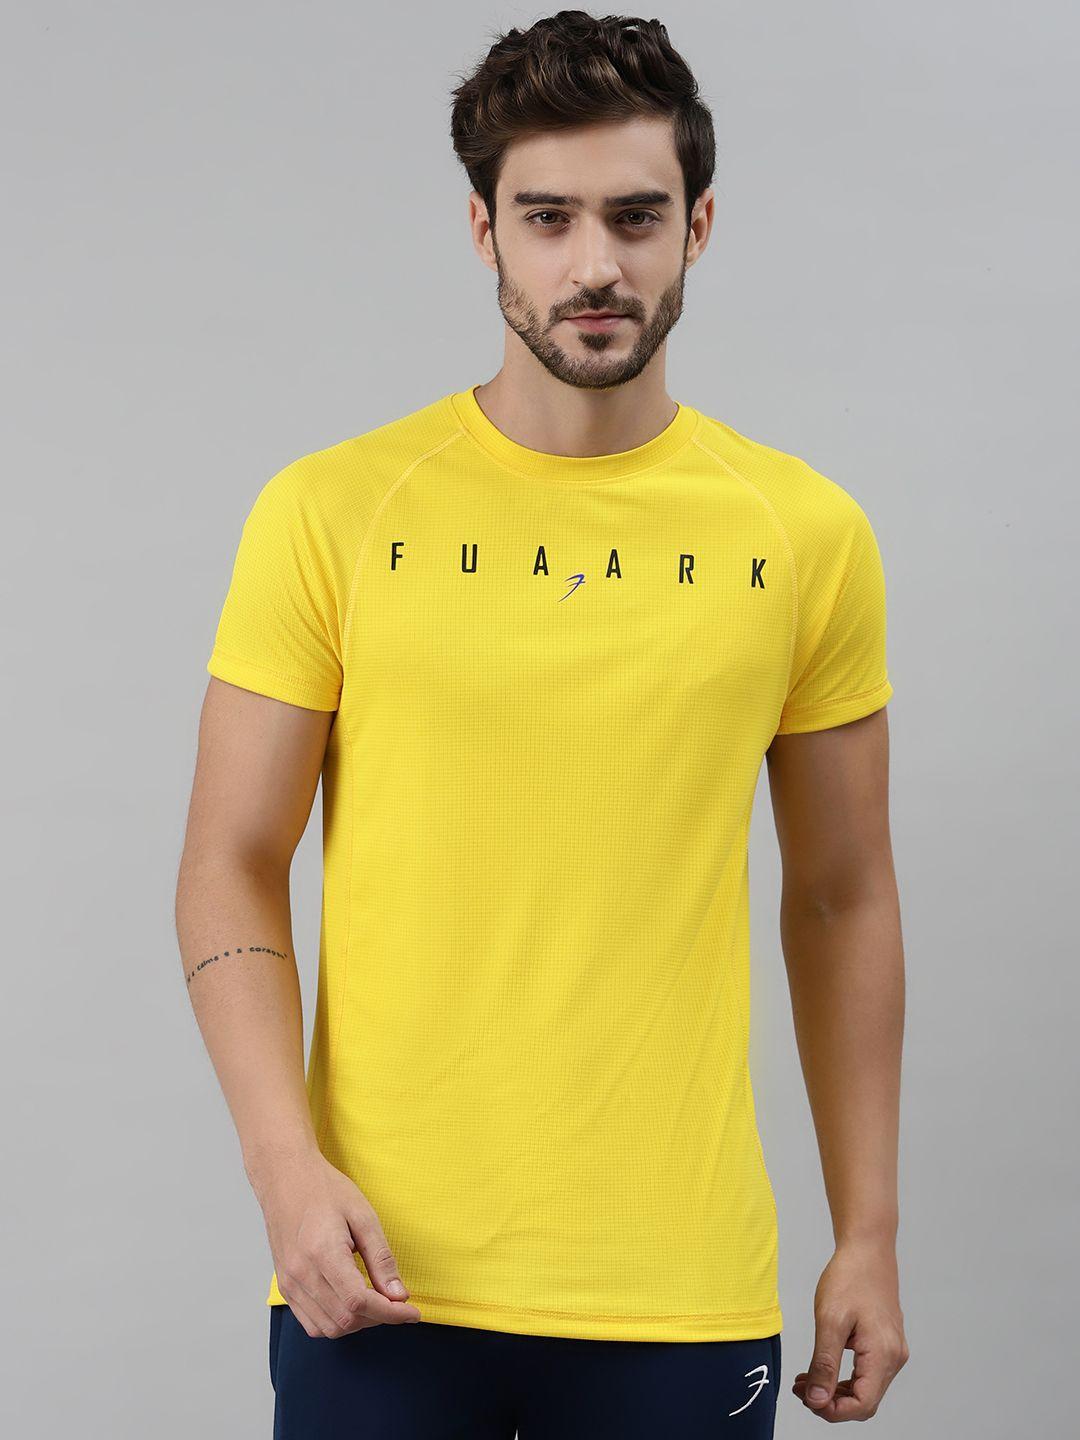 fuaark men yellow & black slim fit self-checked training t-shirt with brand logo detail